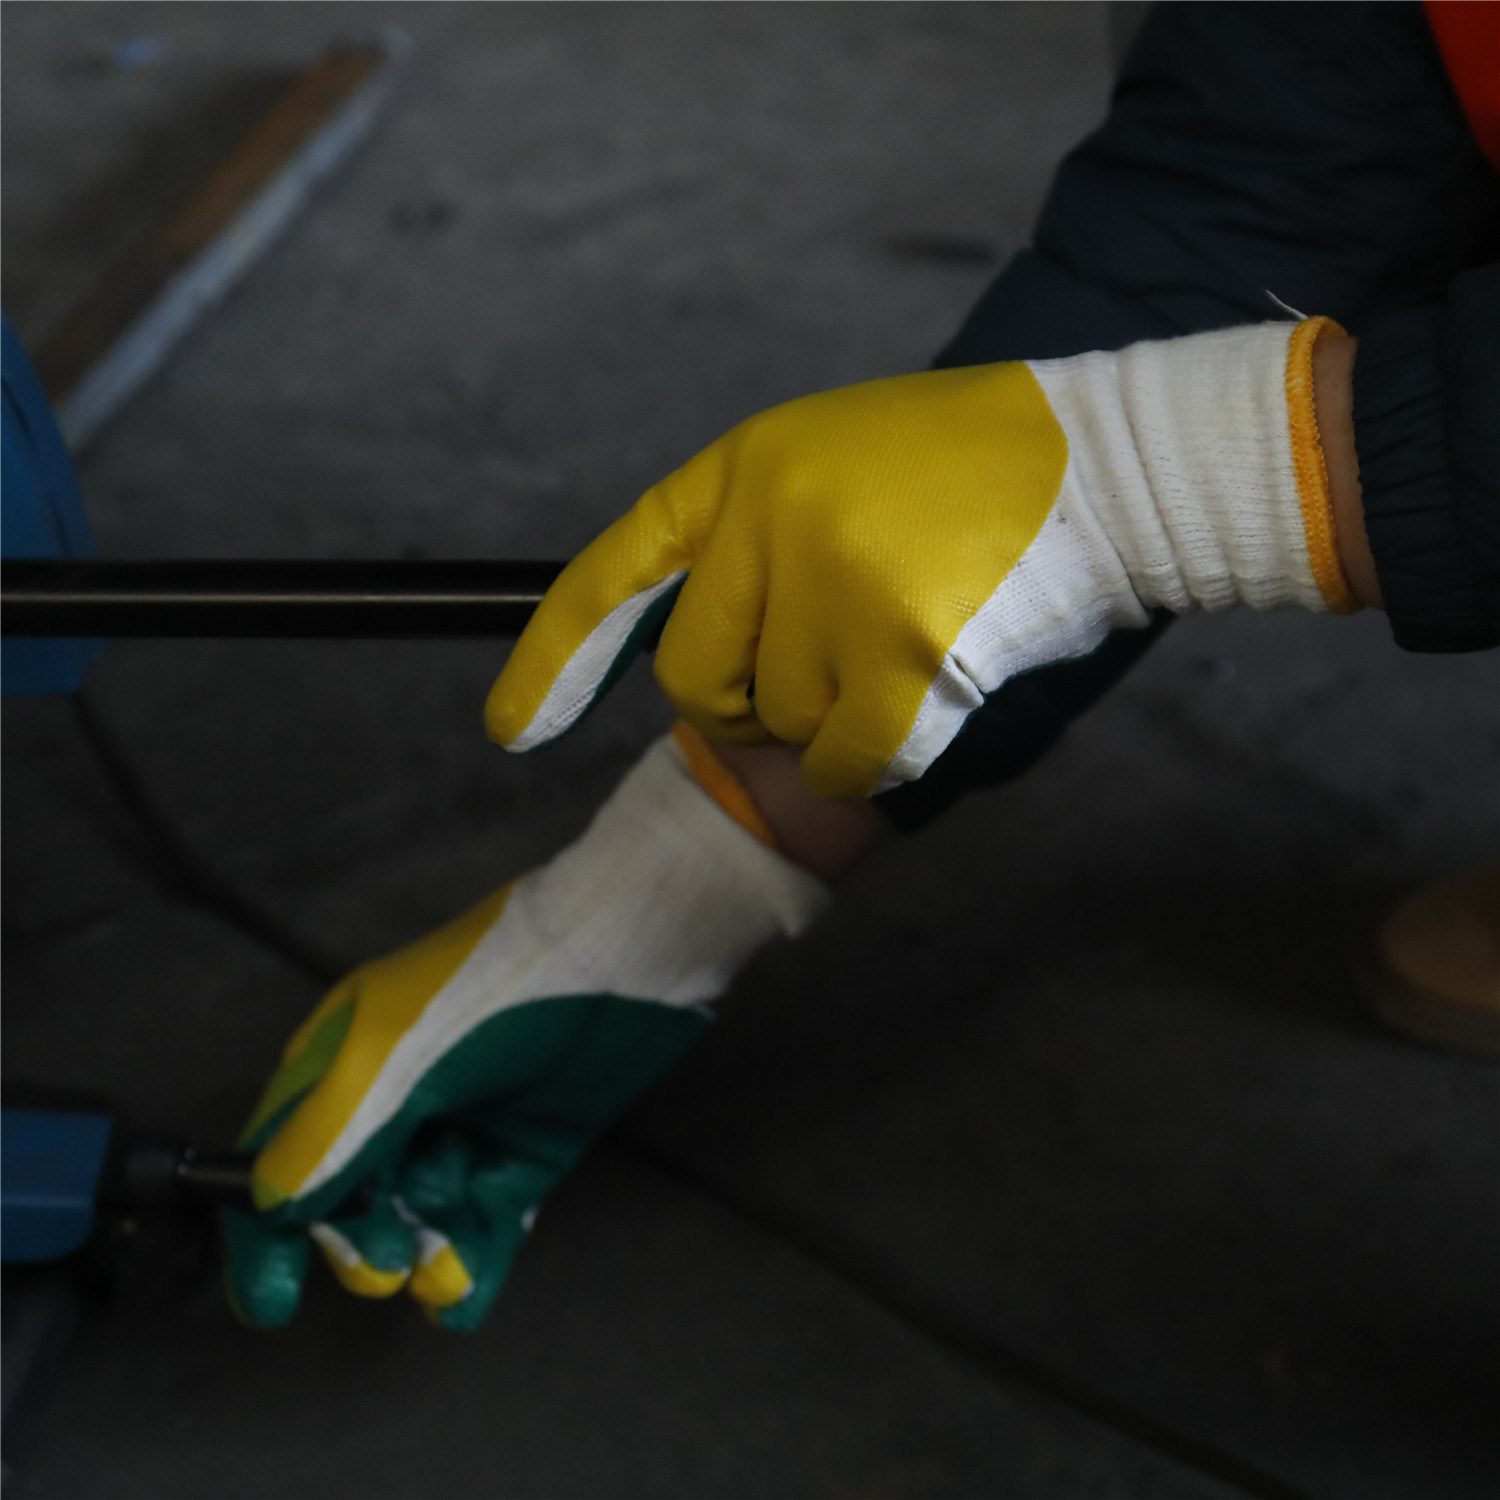 Cotton Heavy Duty Work Protection Gloves For Manual Labor